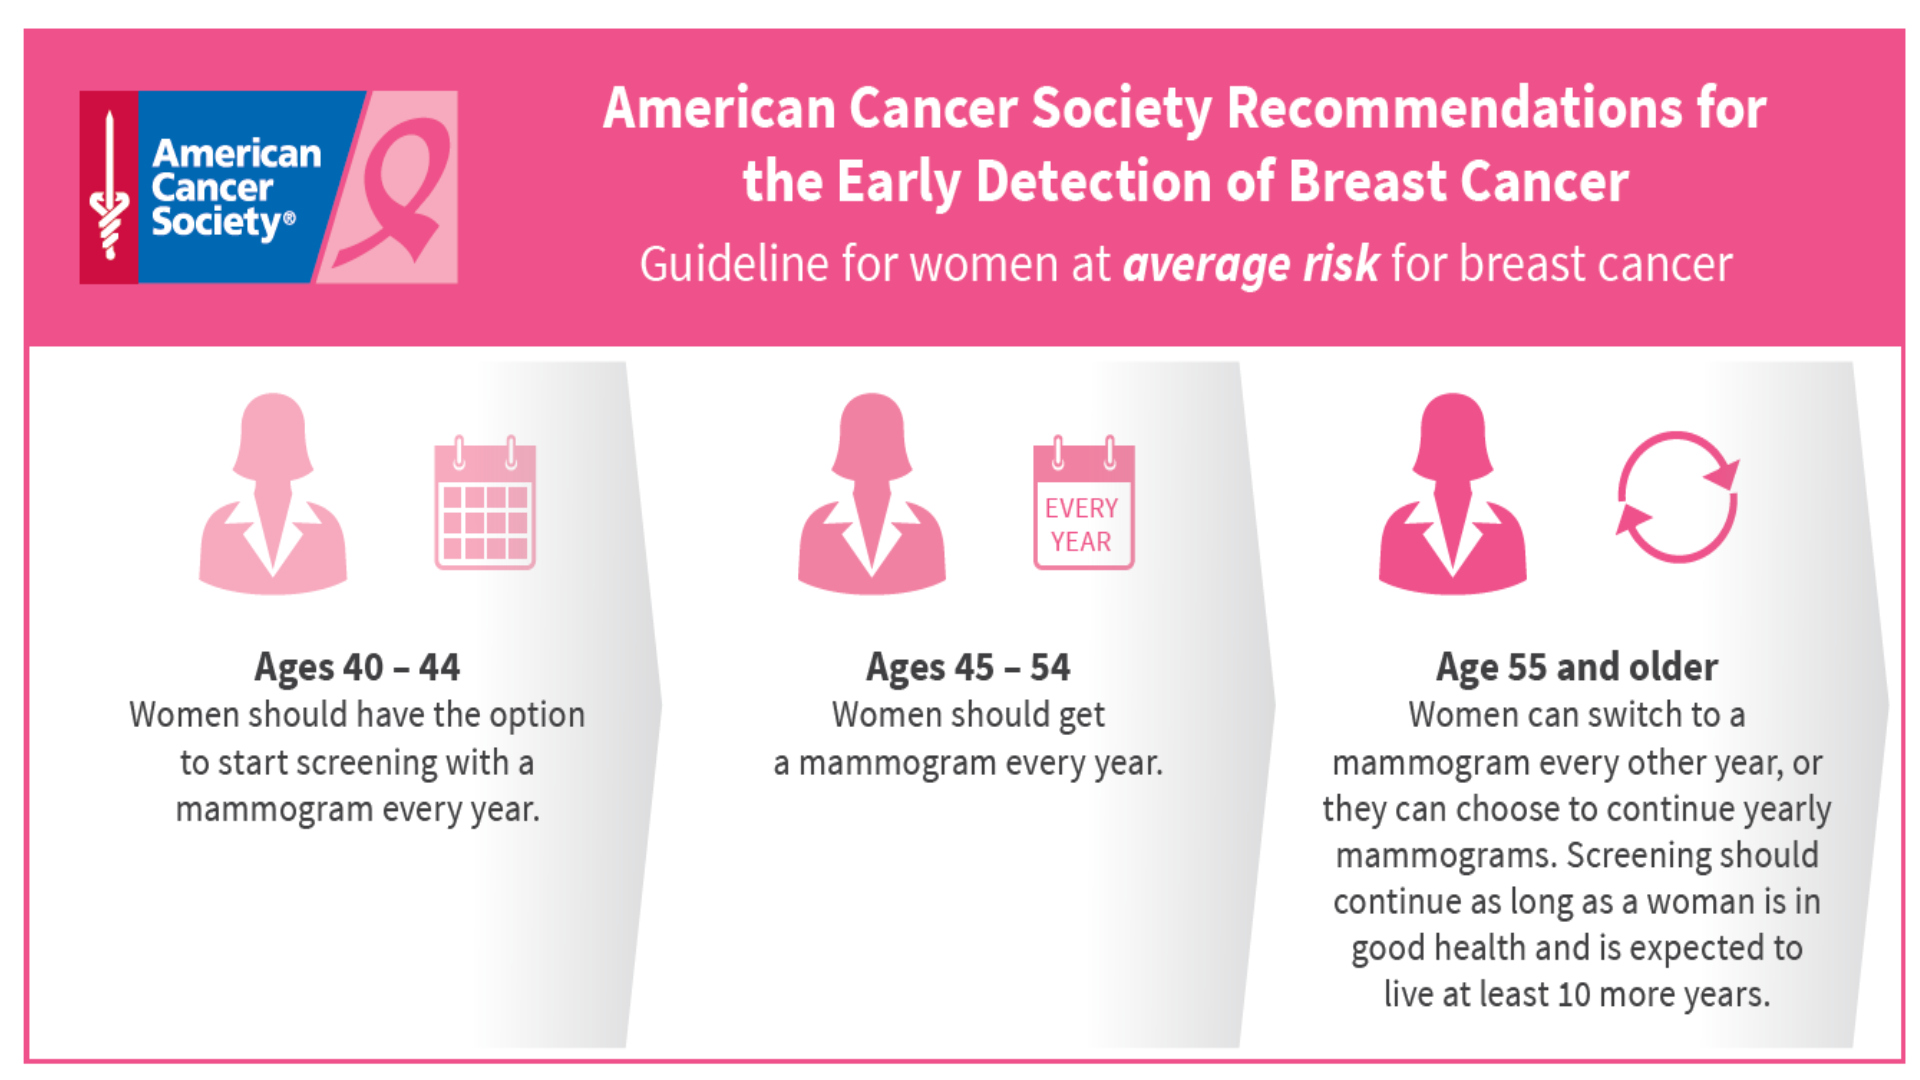 American Cancer Society’s guidelines for early detection of breast cancer